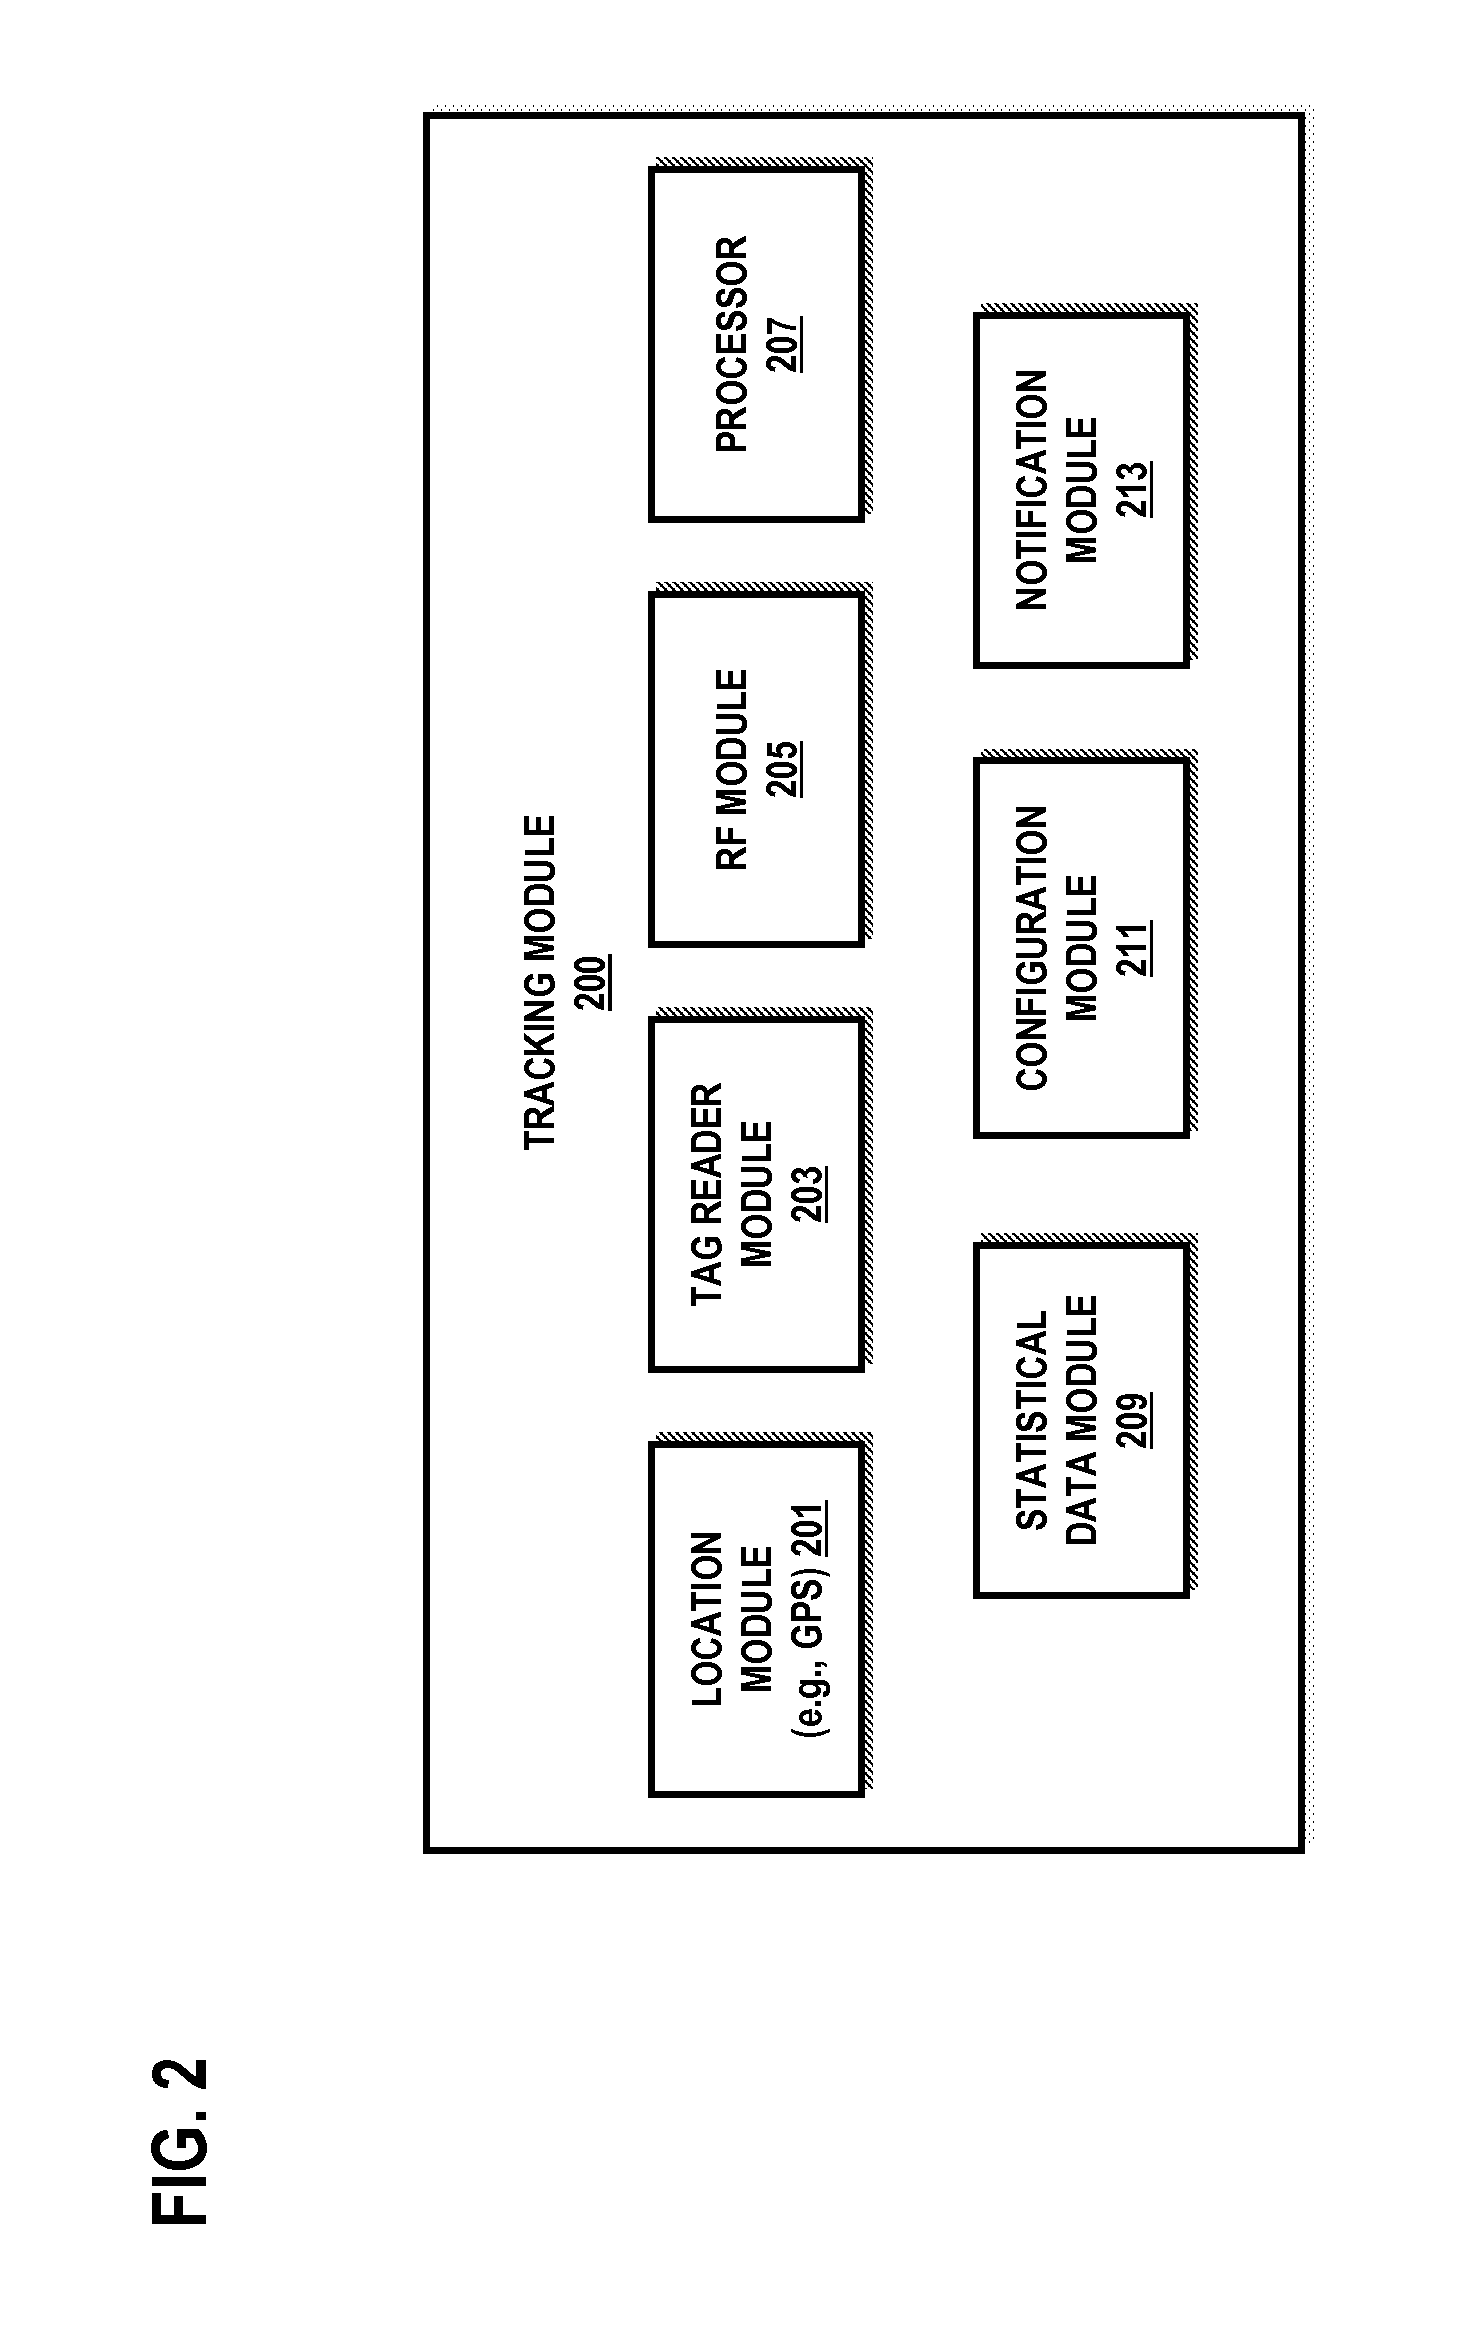 Method and system of providing location-based alerts for tracking personal items